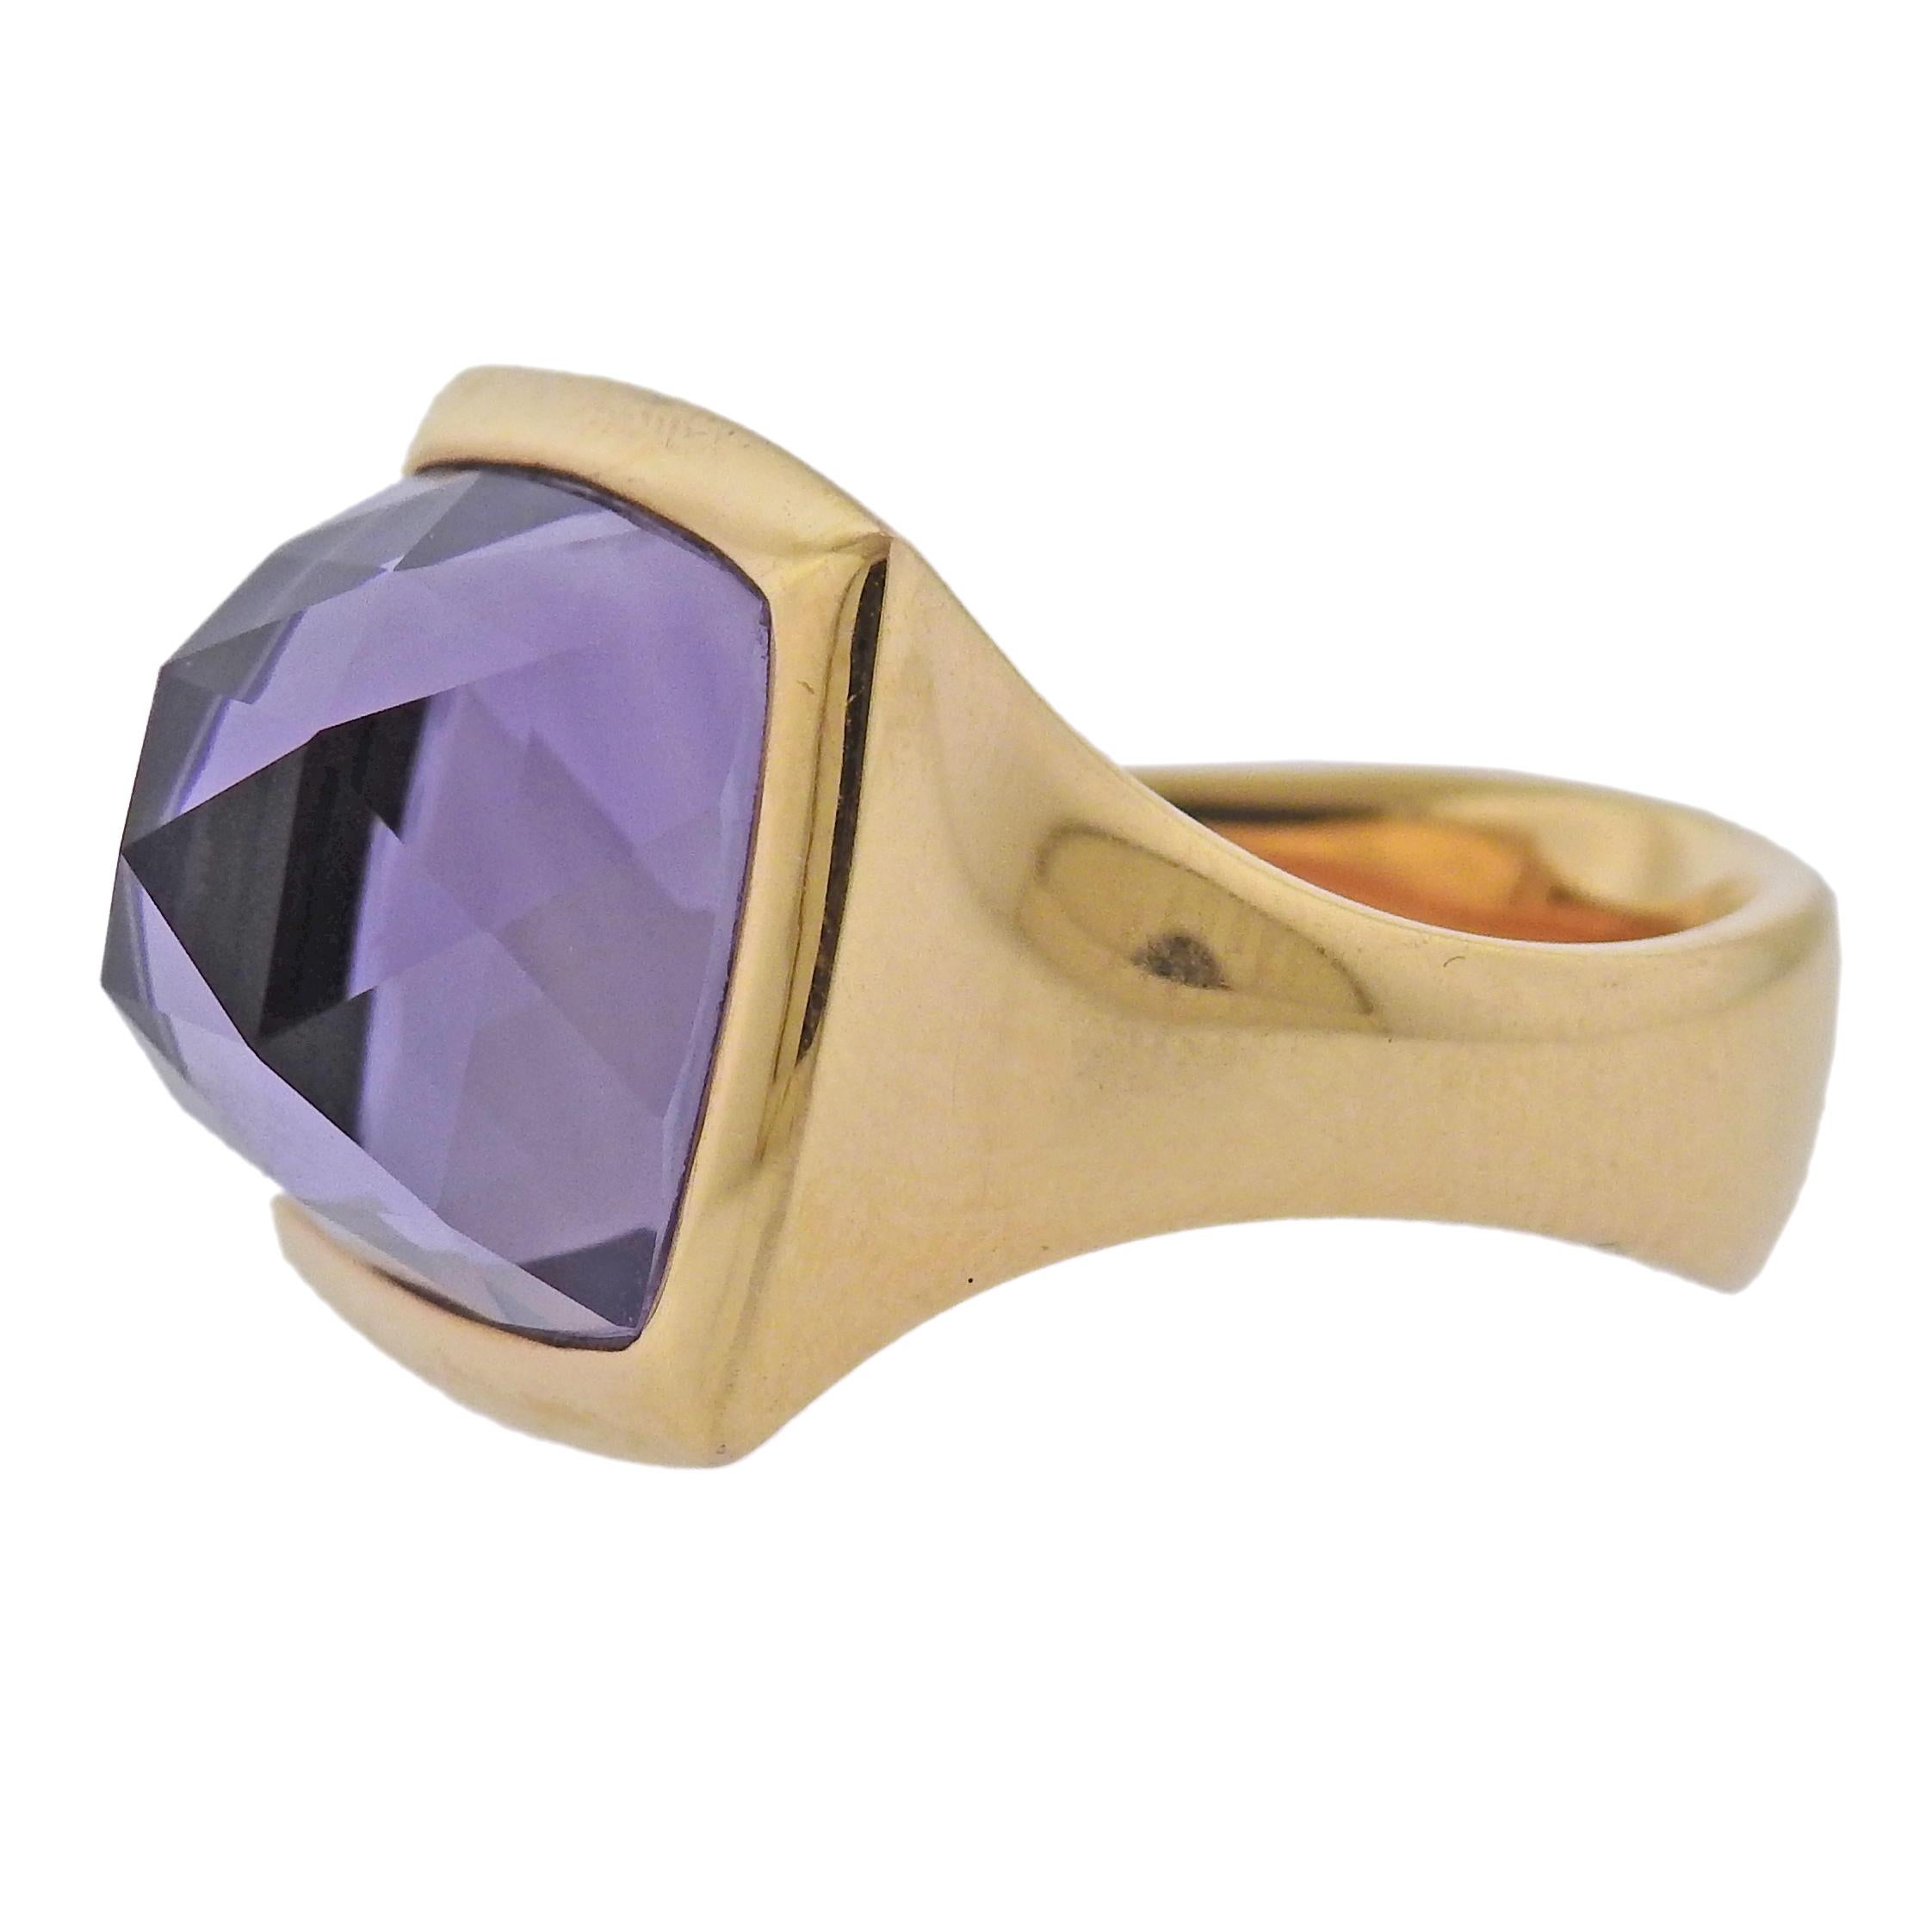 Brand new with tag Bucherer ring, in 18k gold with 12ct faceted amethyst. Retail $7000. Comes with box.  Ring size - 6.25, ring top is 18 x 18mm. Weight - 22.5 grams. Marked: CB 750.